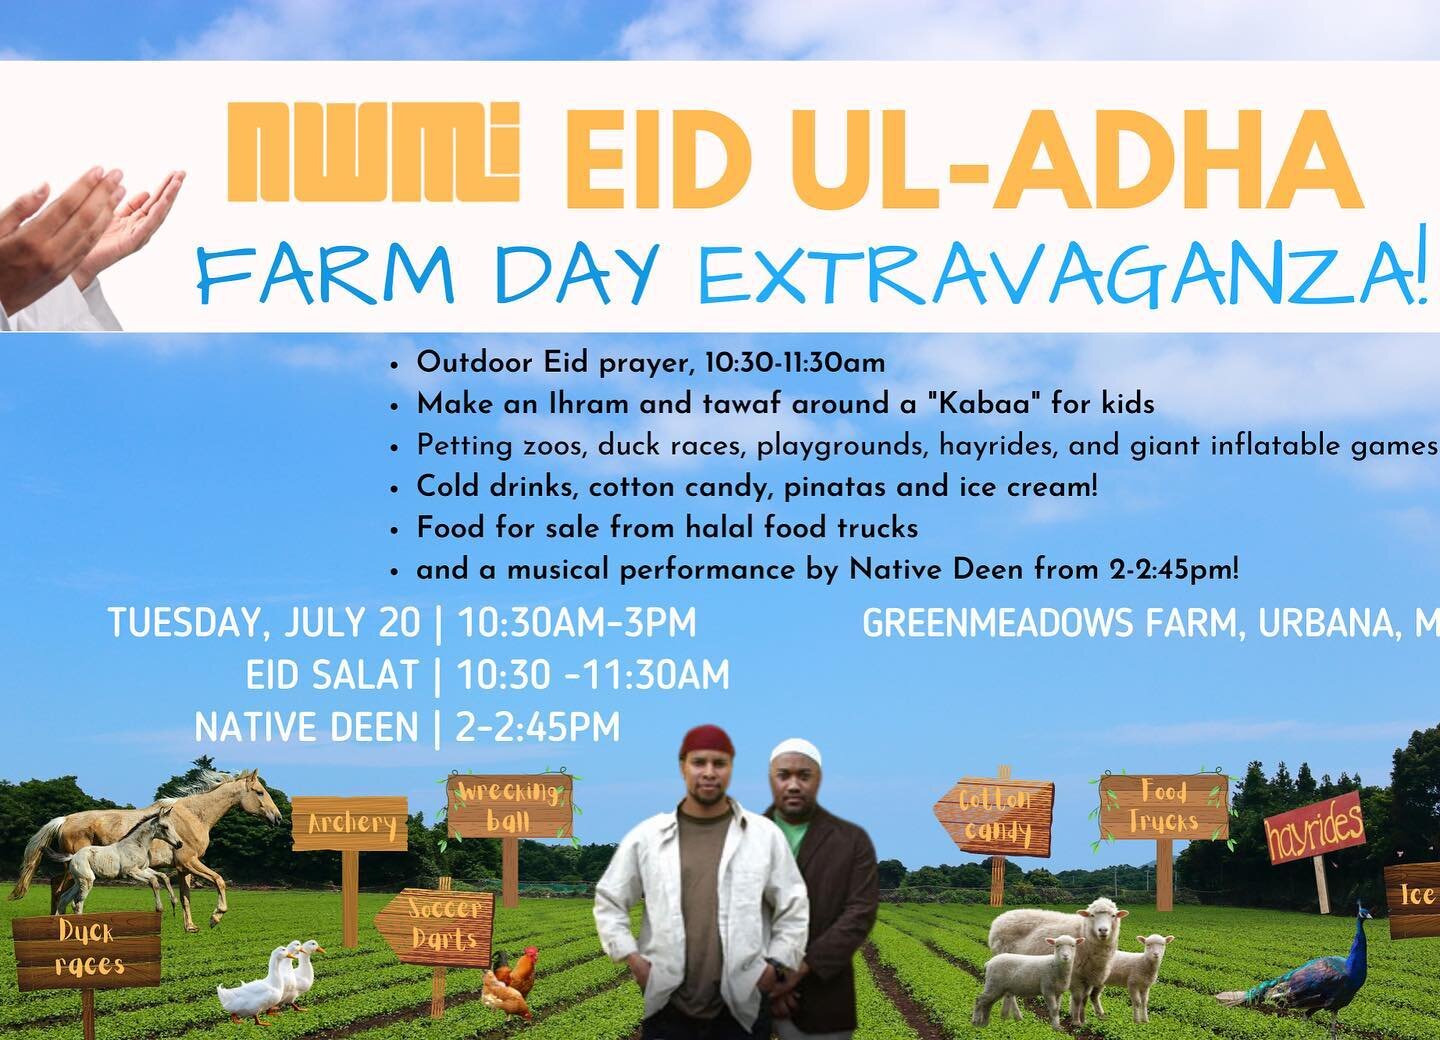 Eid Mubarak! We look forward to seeing you in the morning at our Eid Extravaganza! Please don't forget to register if you haven't already done so! Link in bio!